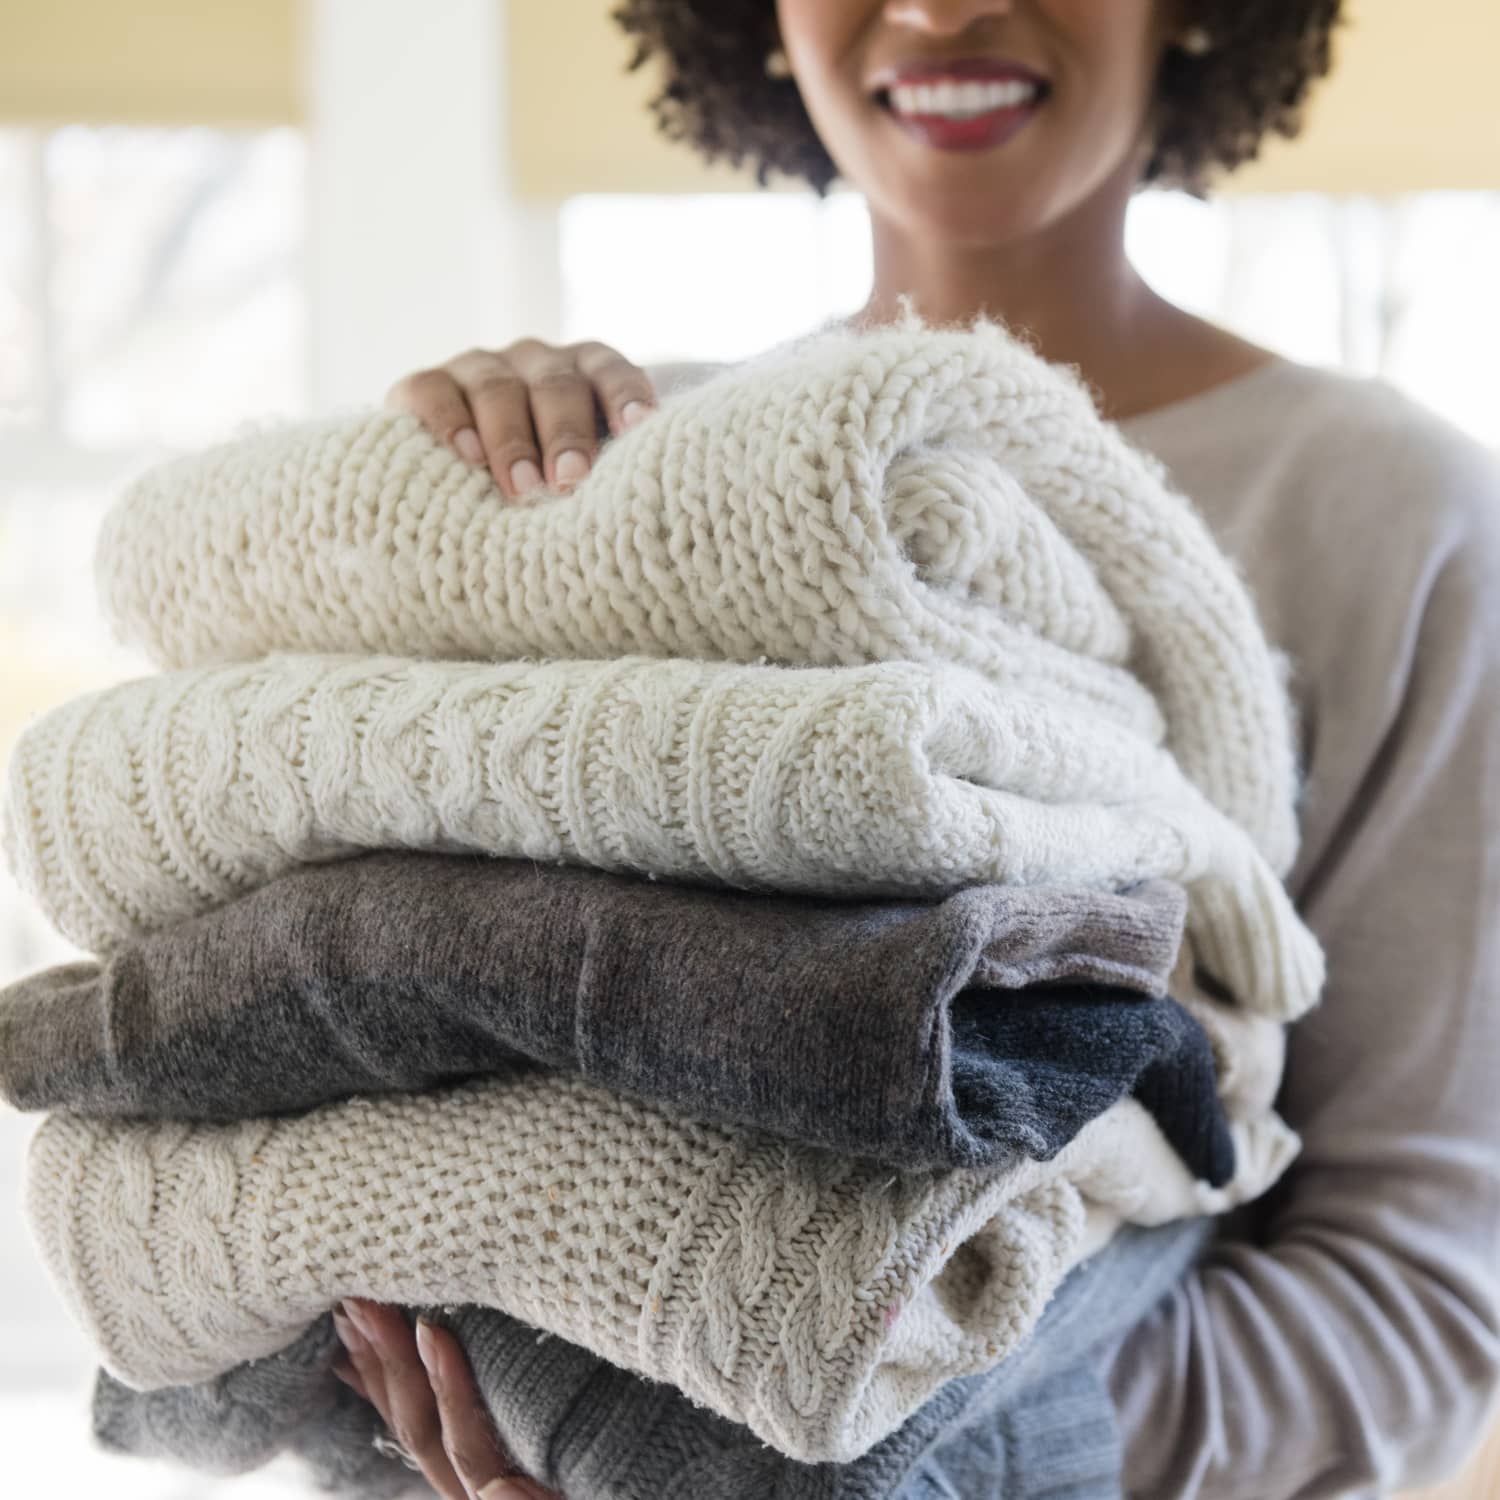 How To Clean and Preserve Precious Wool & Cashmere At Home – The